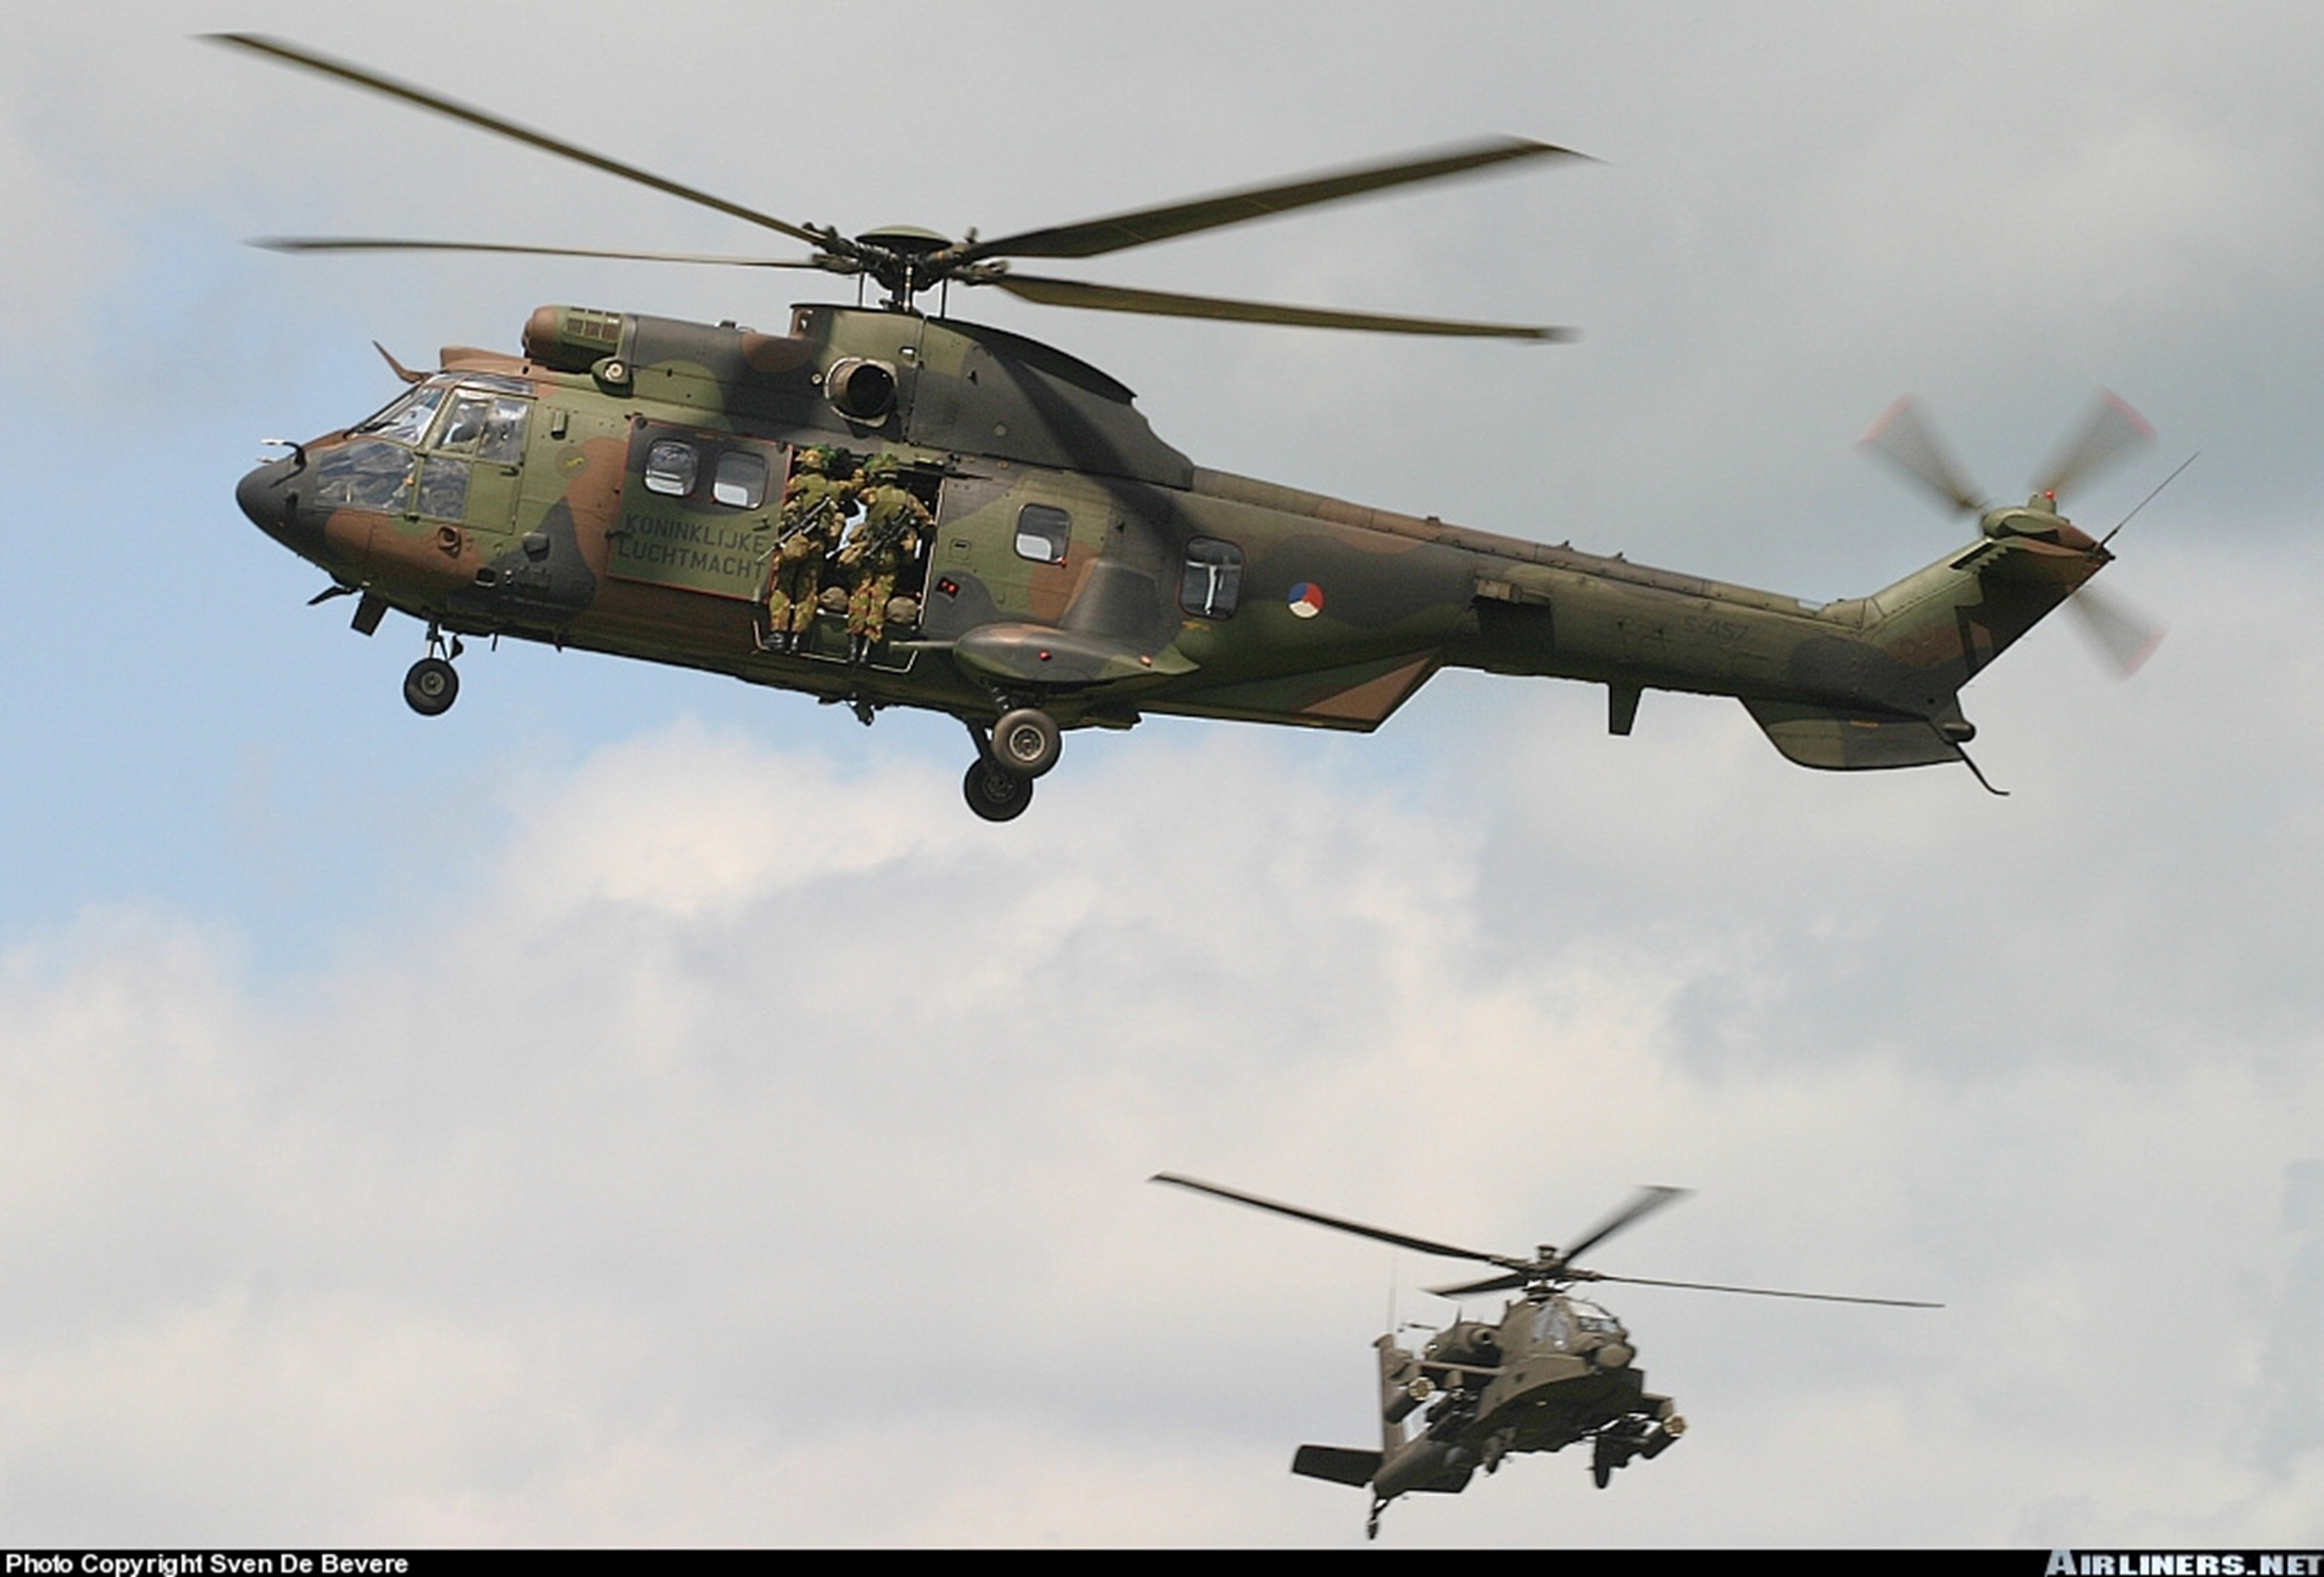 helicopter, Aircraft, Military, Cargo, Transport, Czech republic, Troops, Soldiers Wallpaper